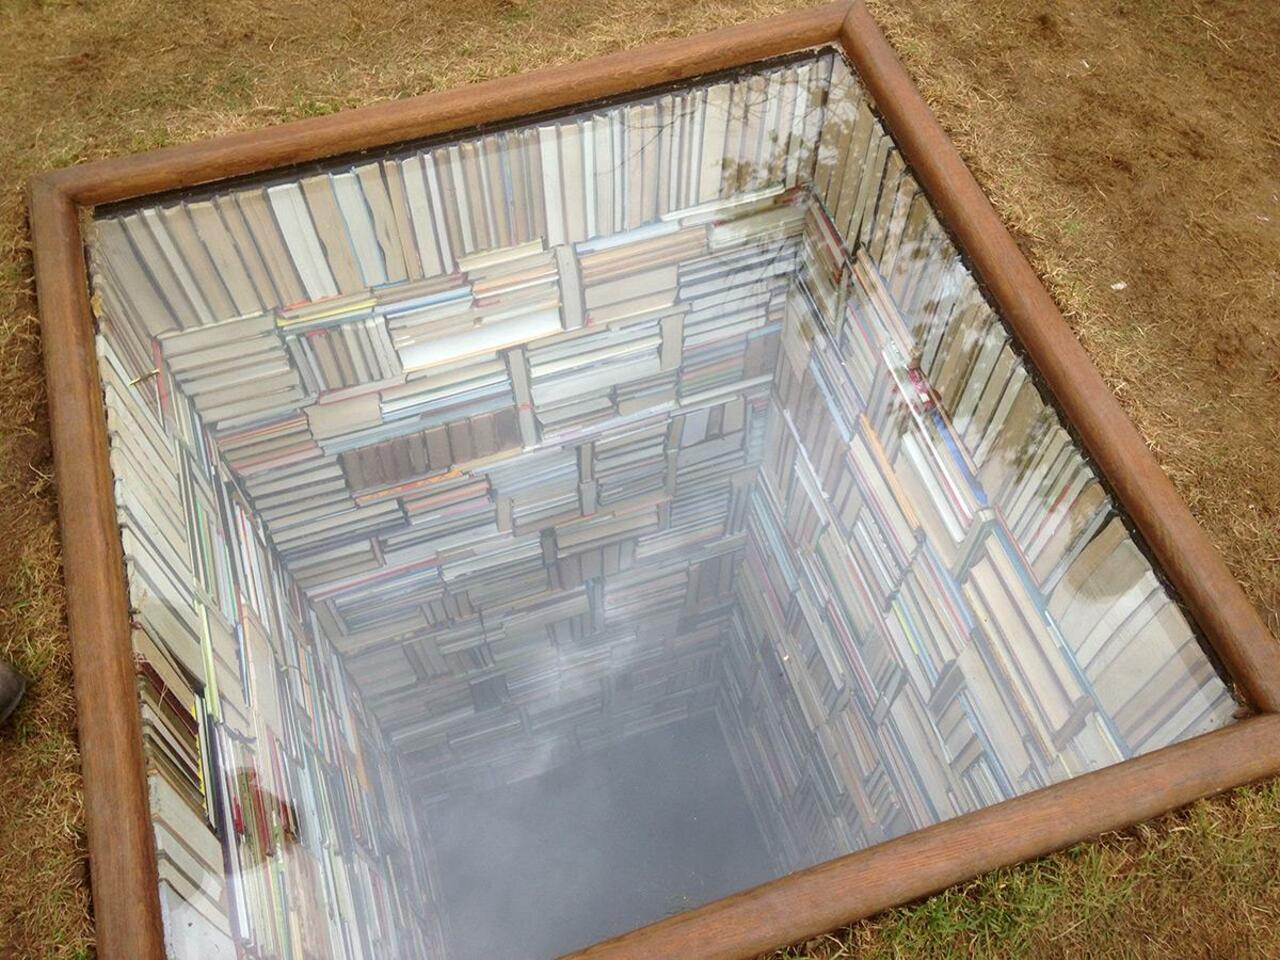 As her entry into Denmark's Sculpture by the Sea, Susanna Hesselberg installed this library falling into the abyss http://t.co/BKxXeMkJ7l